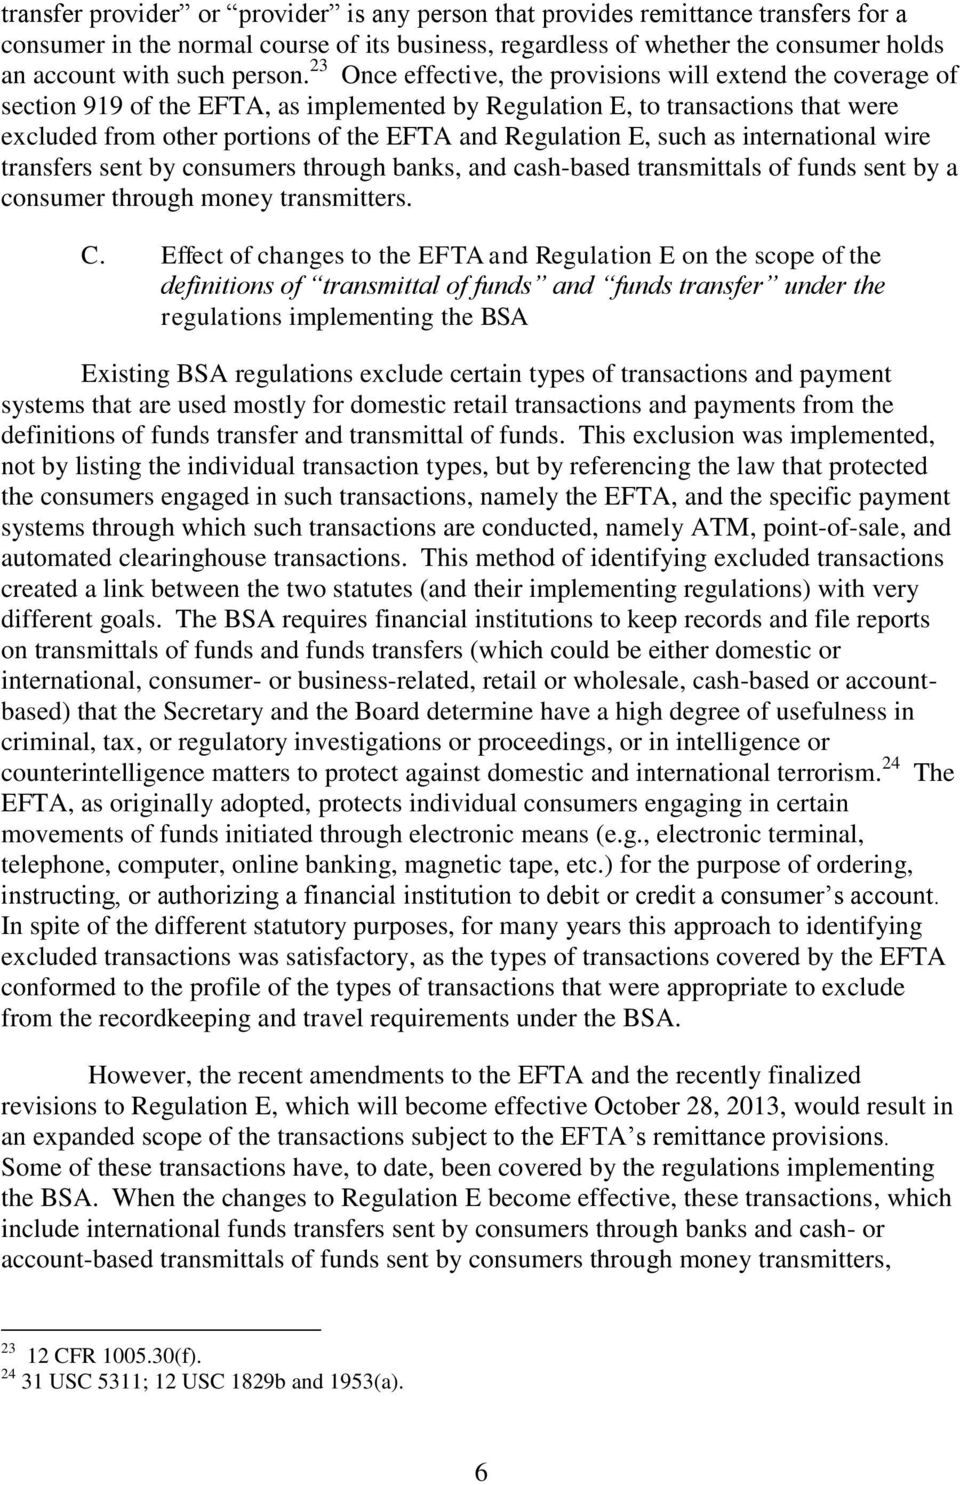 23 Once effective, the provisions will extend the coverage of section 919 of the EFTA, as implemented by Regulation E, to transactions that were excluded from other portions of the EFTA and